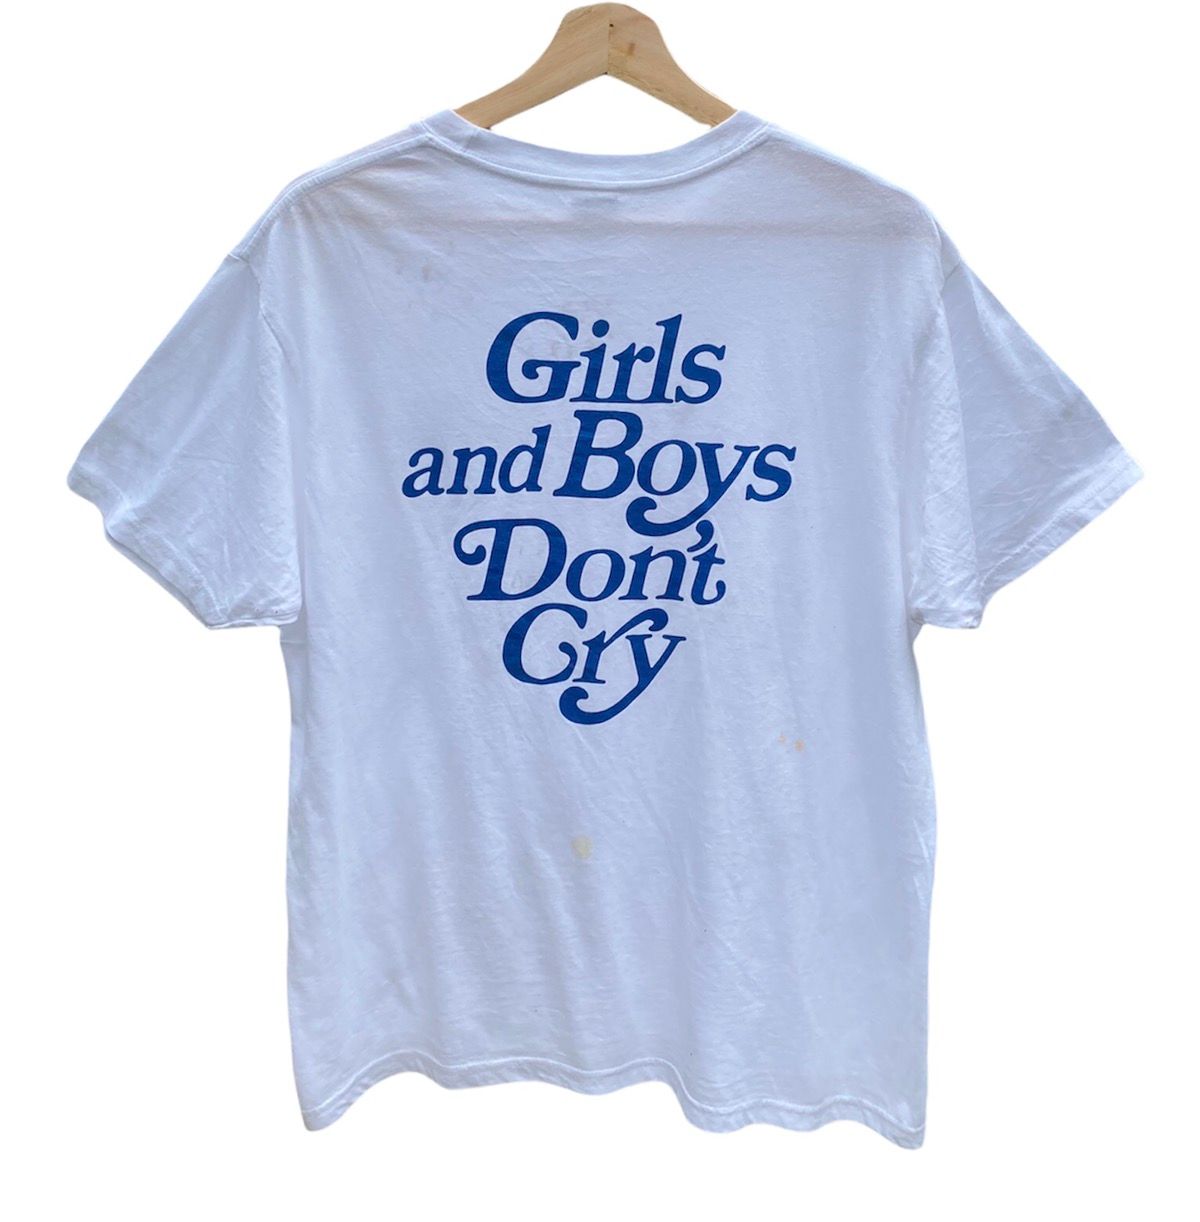 VINTAGE GIRLS and BOYS DONT CRY Travis Scott Style Tshirt - 1